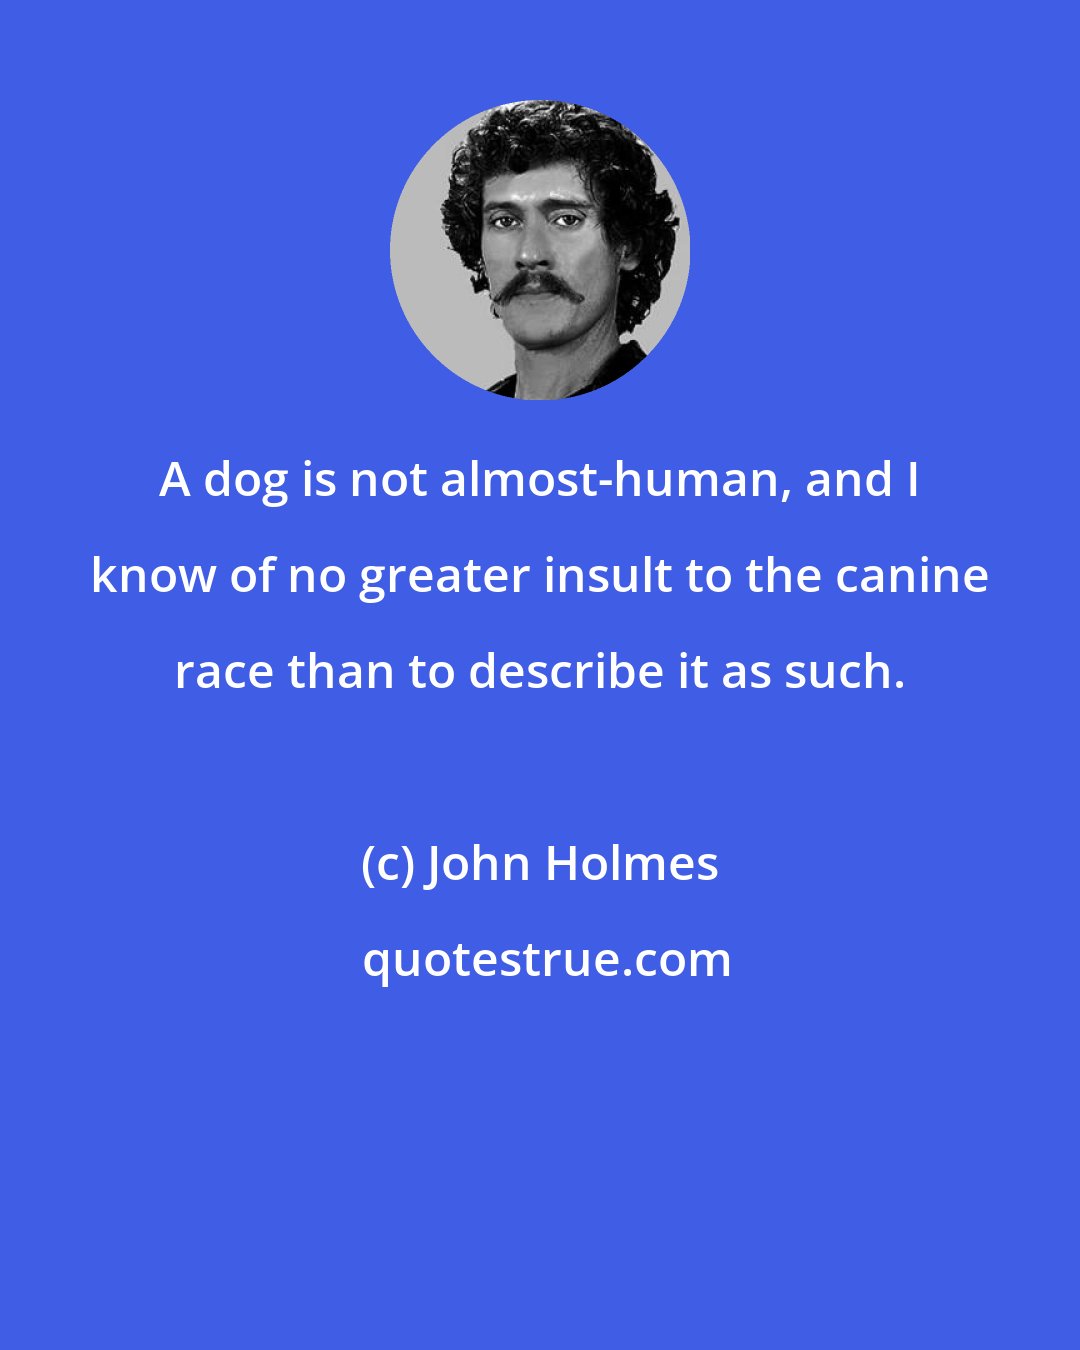 John Holmes: A dog is not almost-human, and I know of no greater insult to the canine race than to describe it as such.